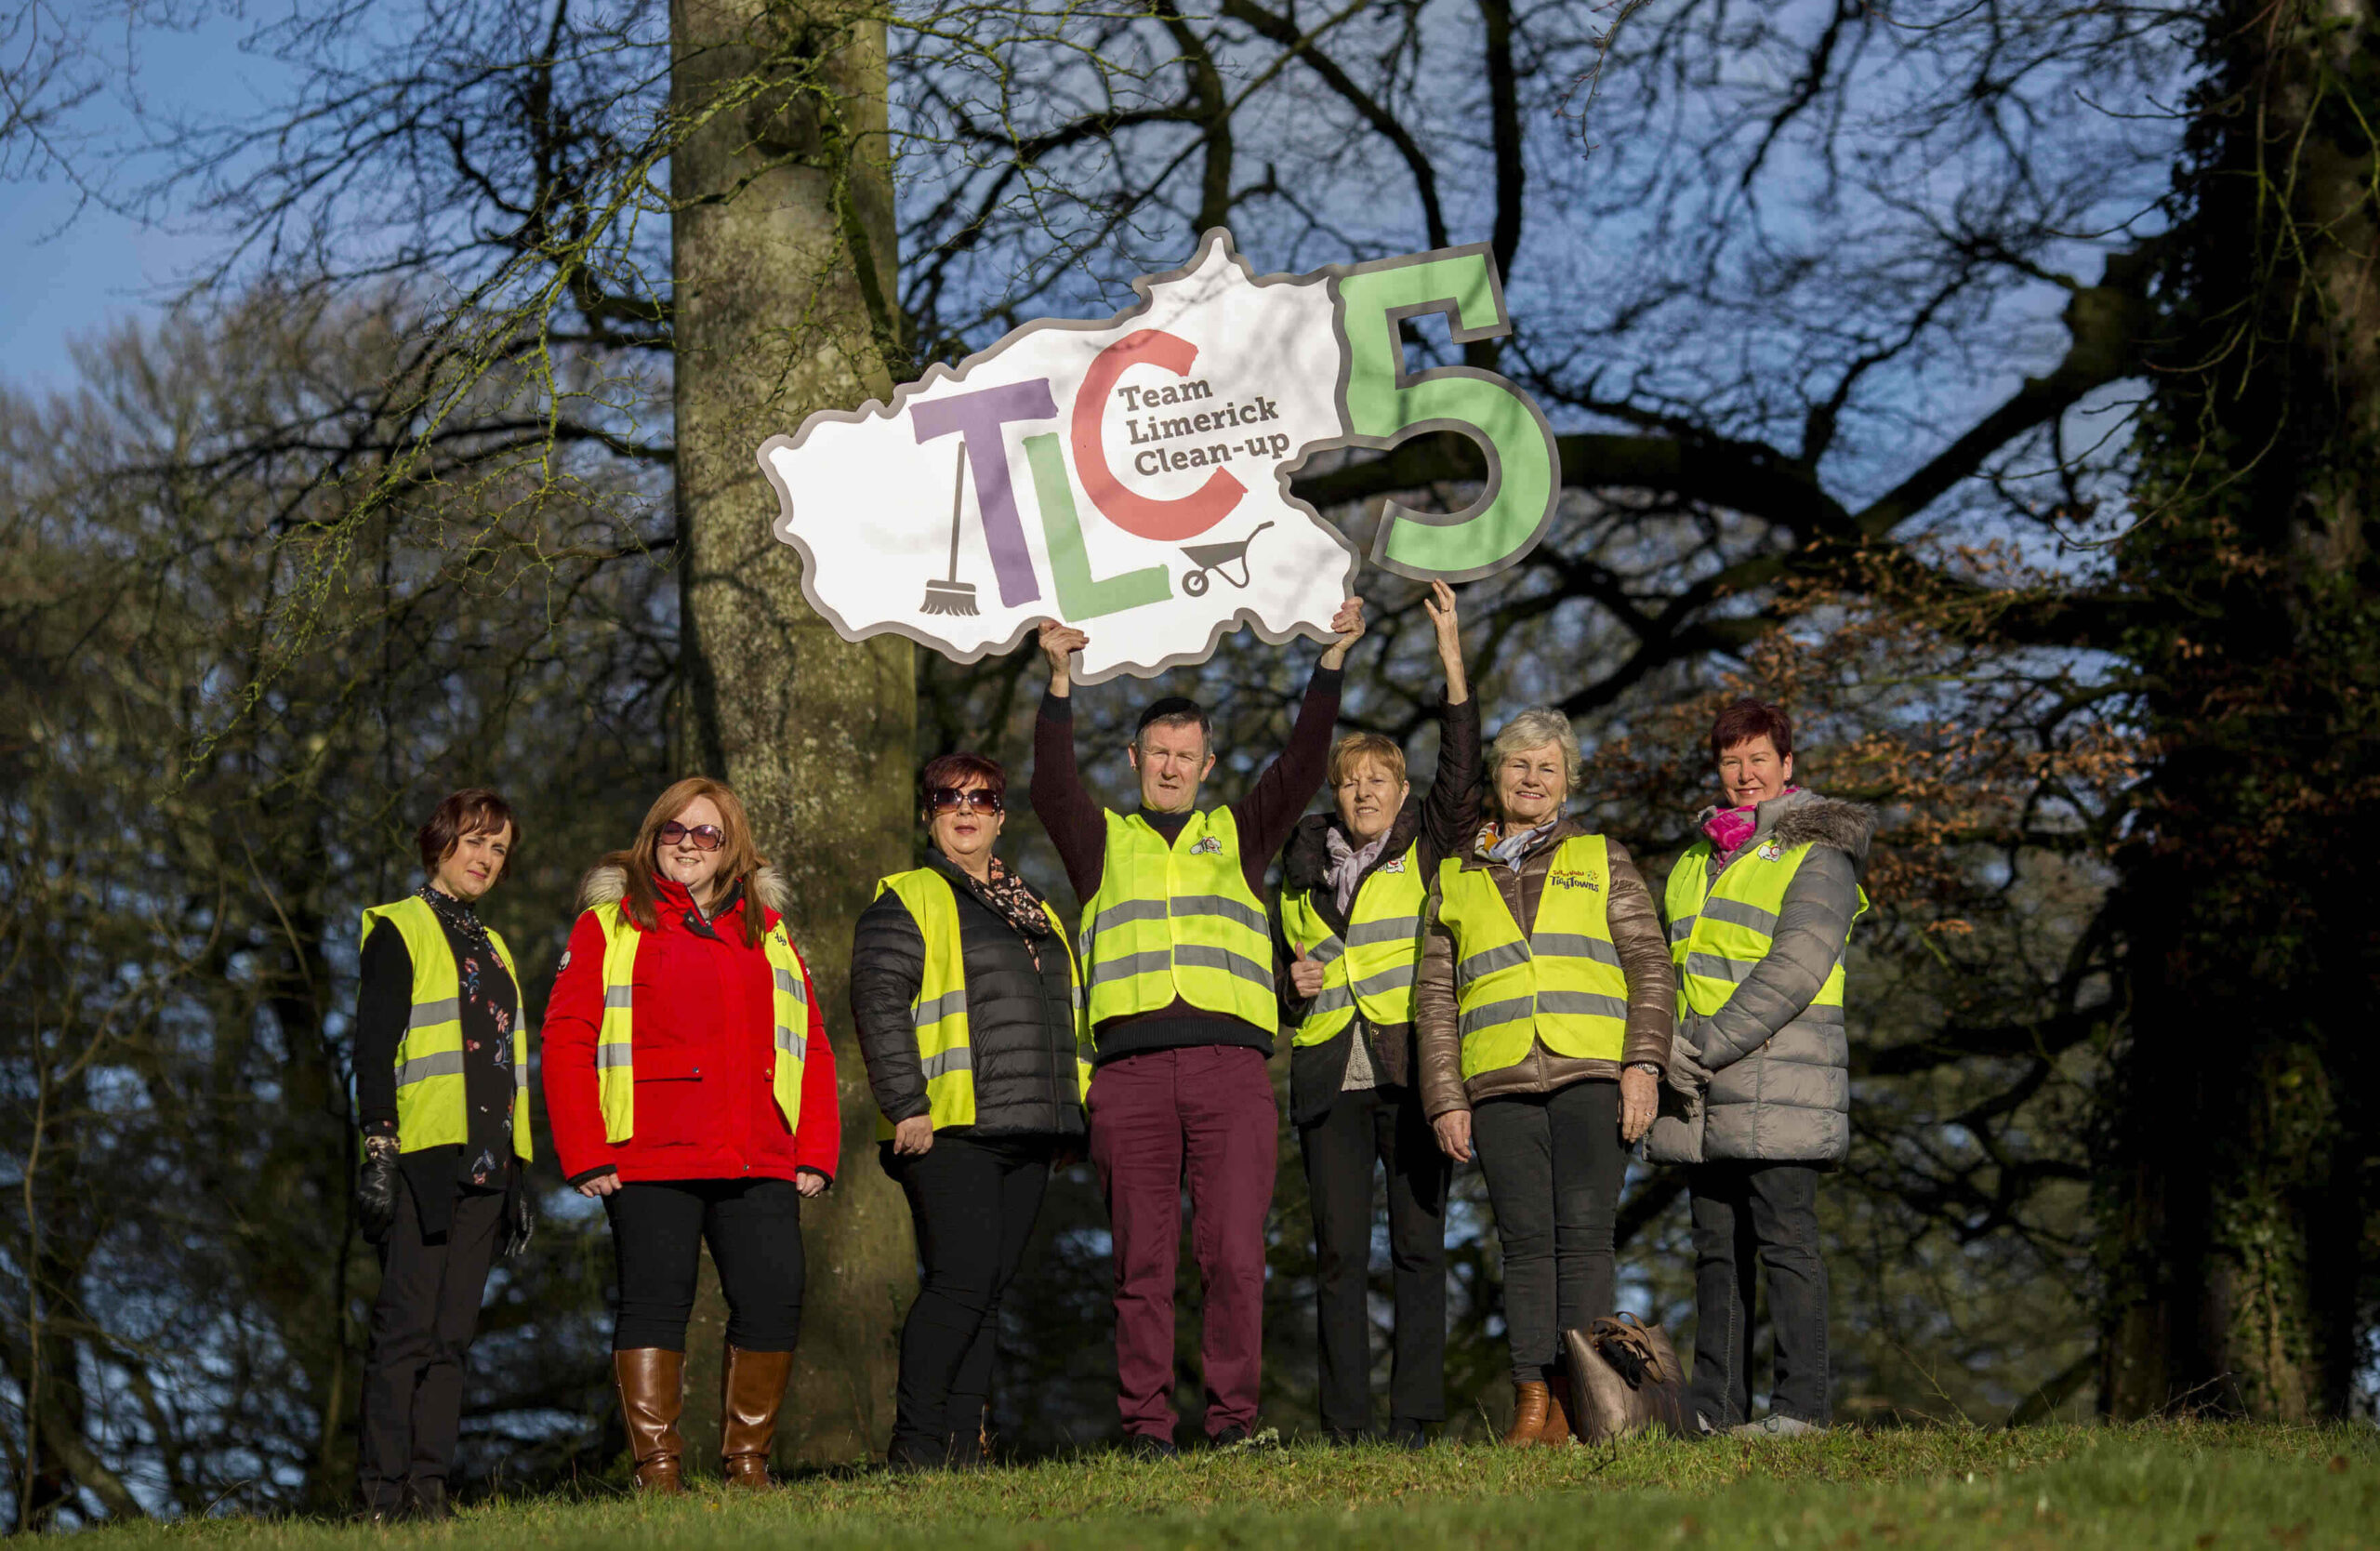 TLC LAMA award - John Hardiman and fellow Castleconnell Tidy Town members pictured at the launch of Team Limerick Clean-Up 5 in Castleconnell, Co. Limerick in 2019.  Picture: Alan Place